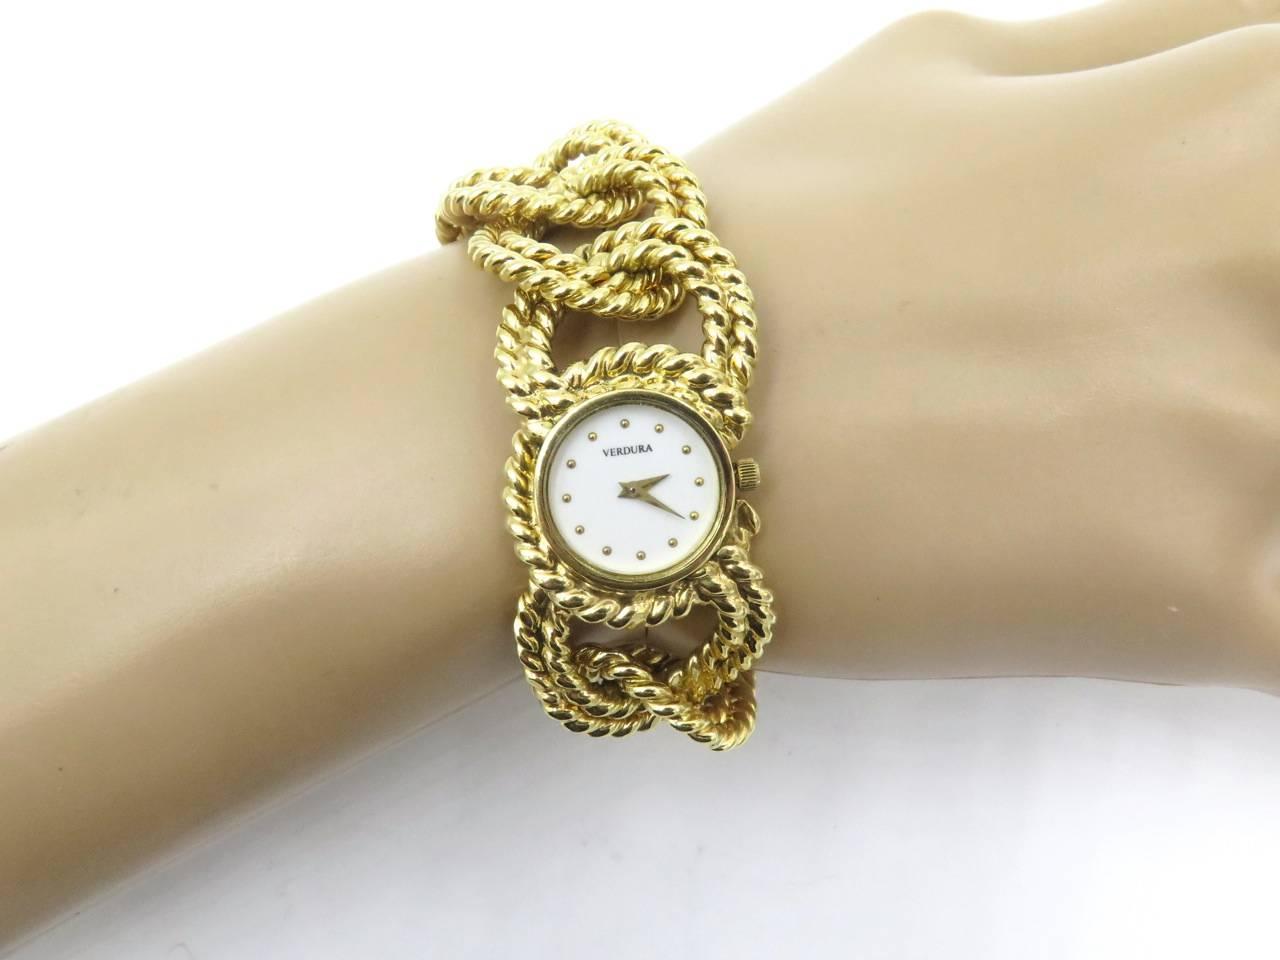 An 18 karat yellow gold rope link bracelet watch, Verdura.  Of quartz movement, the white dial with dot numerals, with rope link bezel, joined by a rope work curb link bracelet. Length is approximately 7 1/2 inches, gross weight is approximately